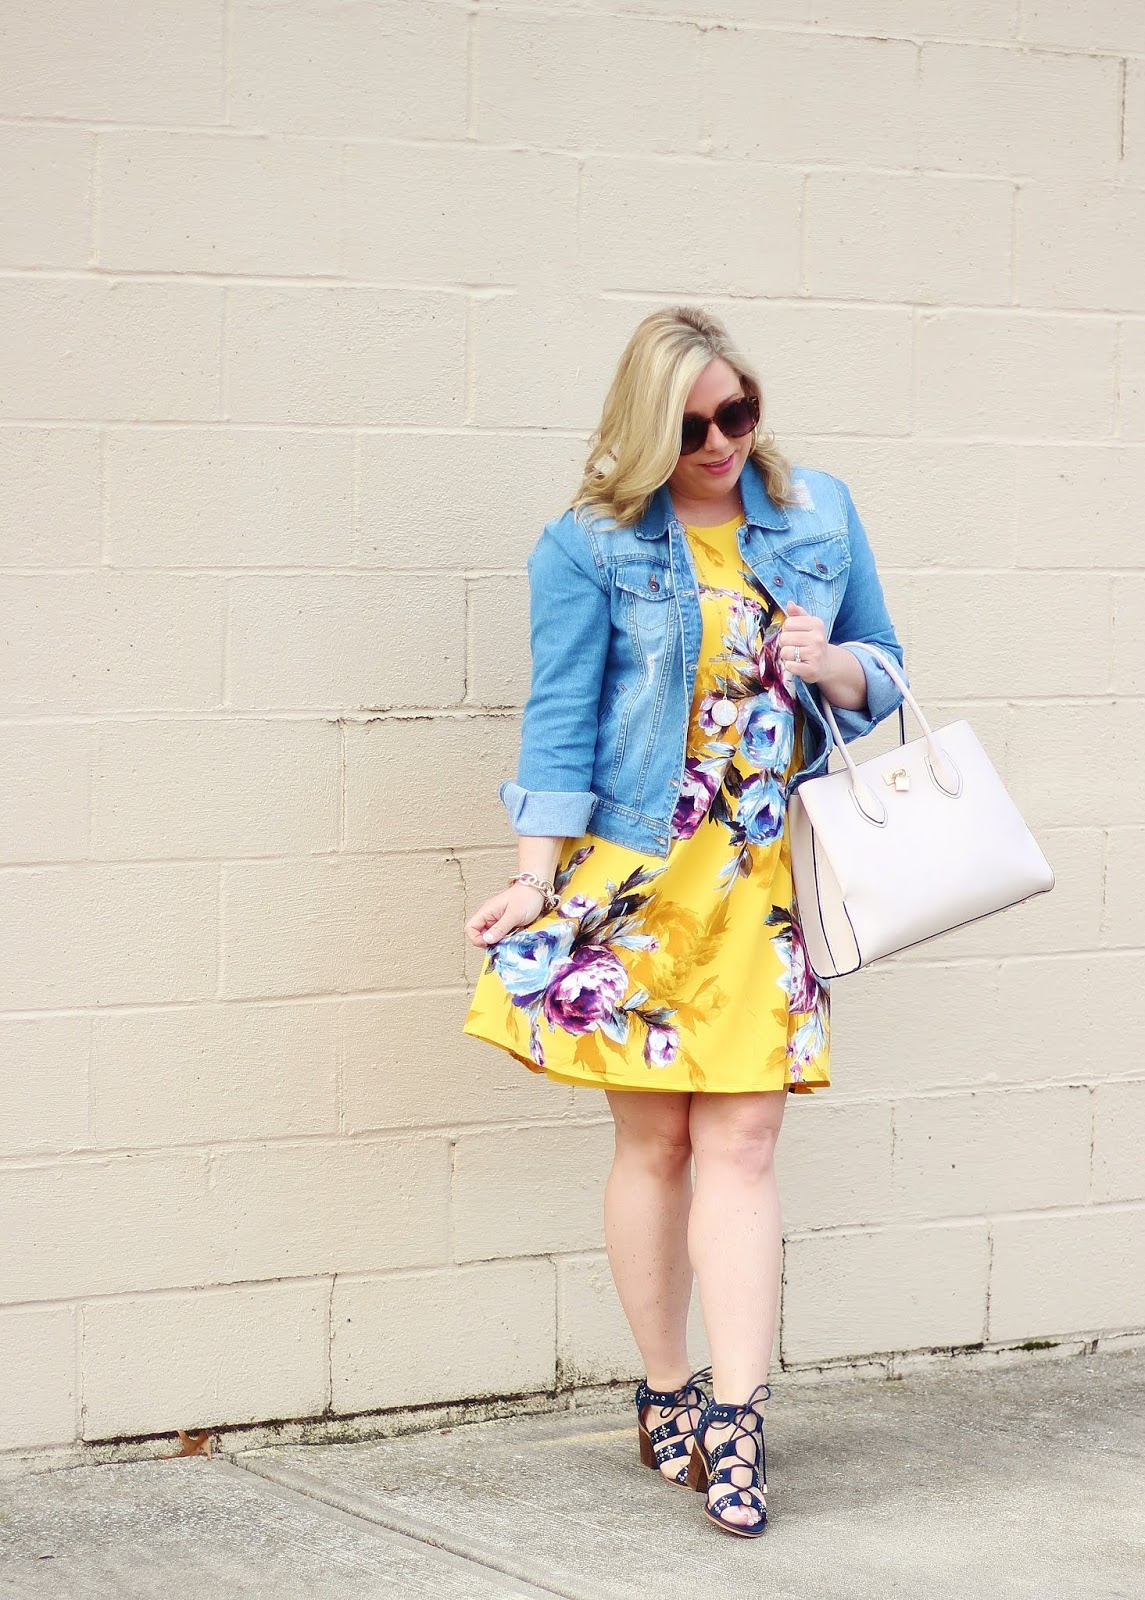 Stepping into Spring Style | Cato | JANA STYLE® | A Fashion + Style Blog